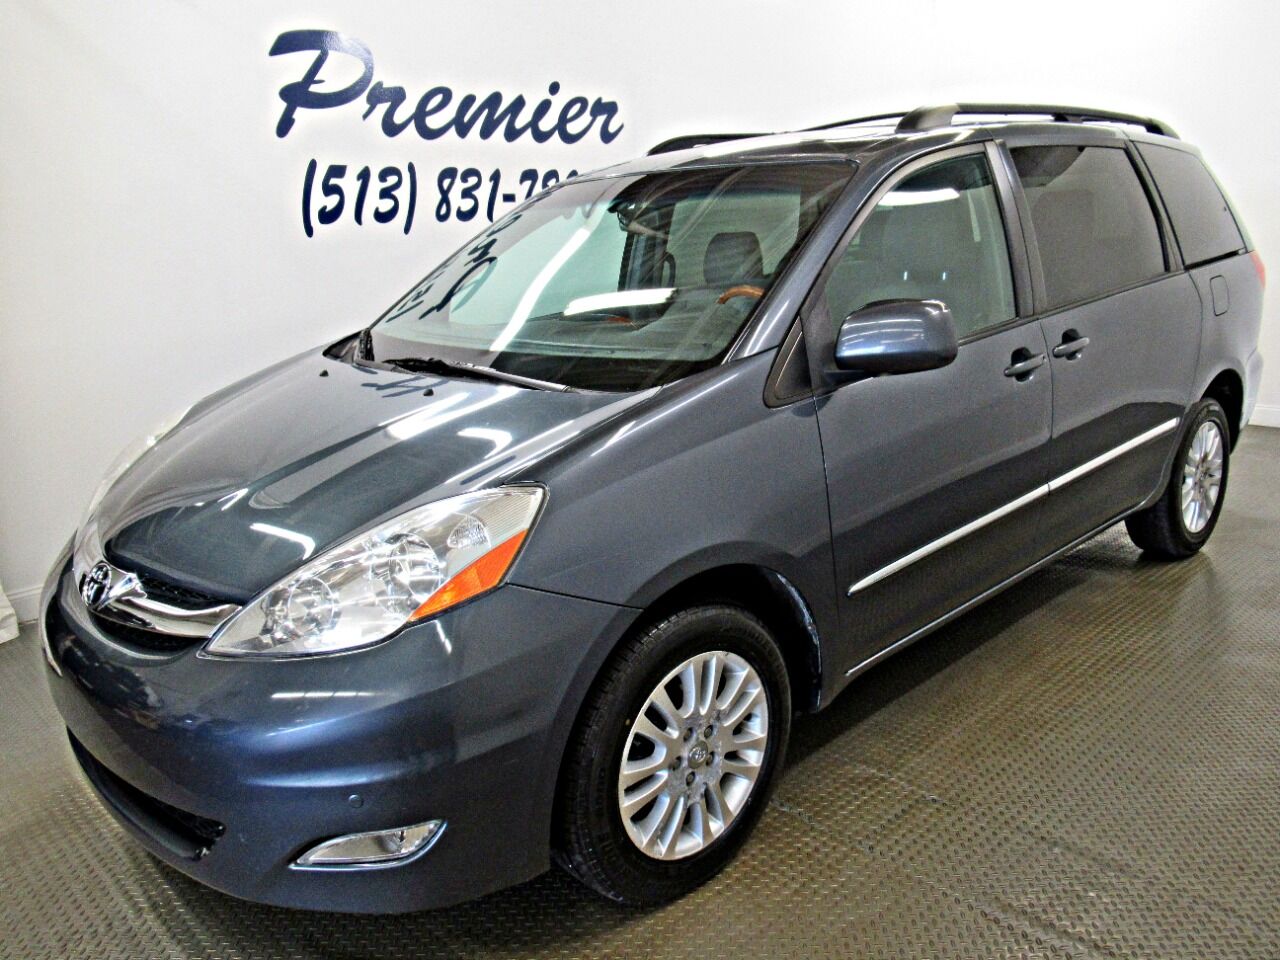 Used 2009 Toyota Sienna For Sale - Carsforsale.com®